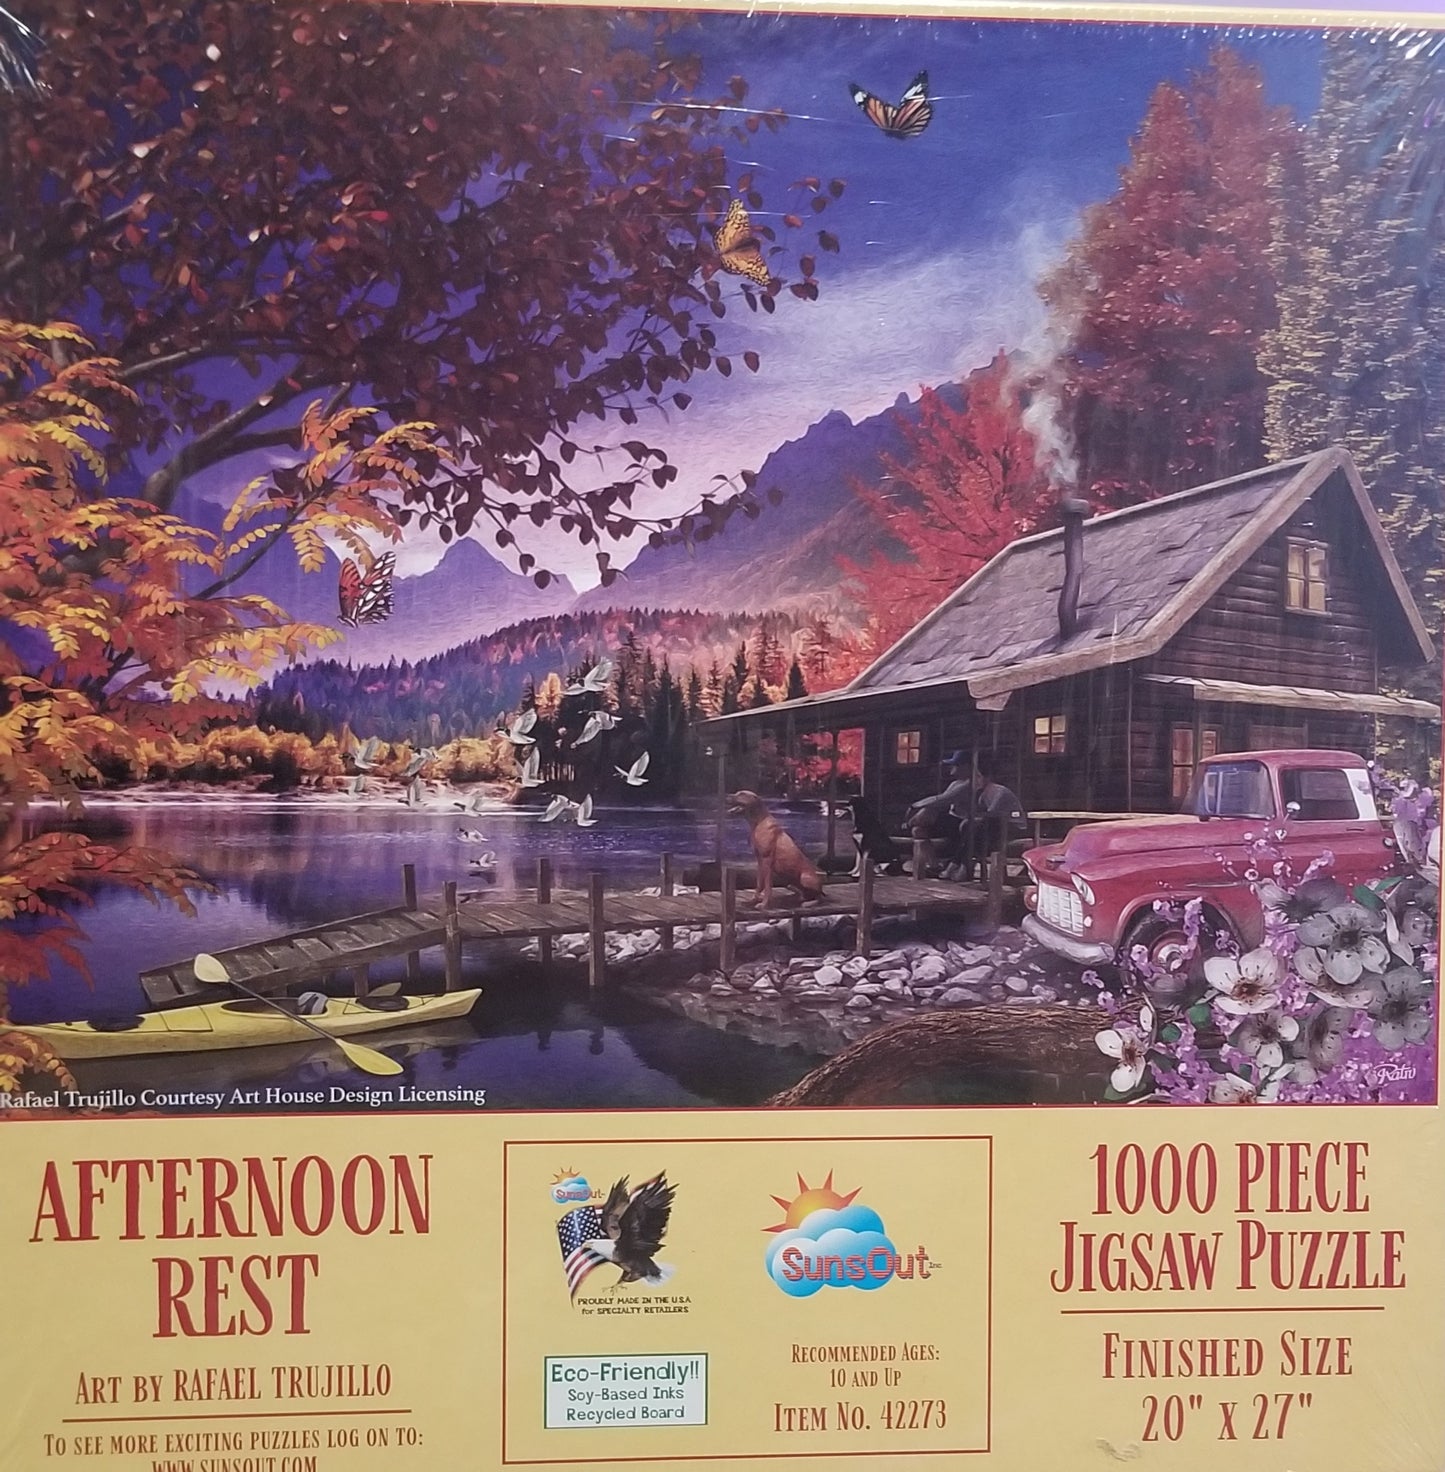 Afternoon Rest by Rafael Trujillo,1000 Piece Puzzle